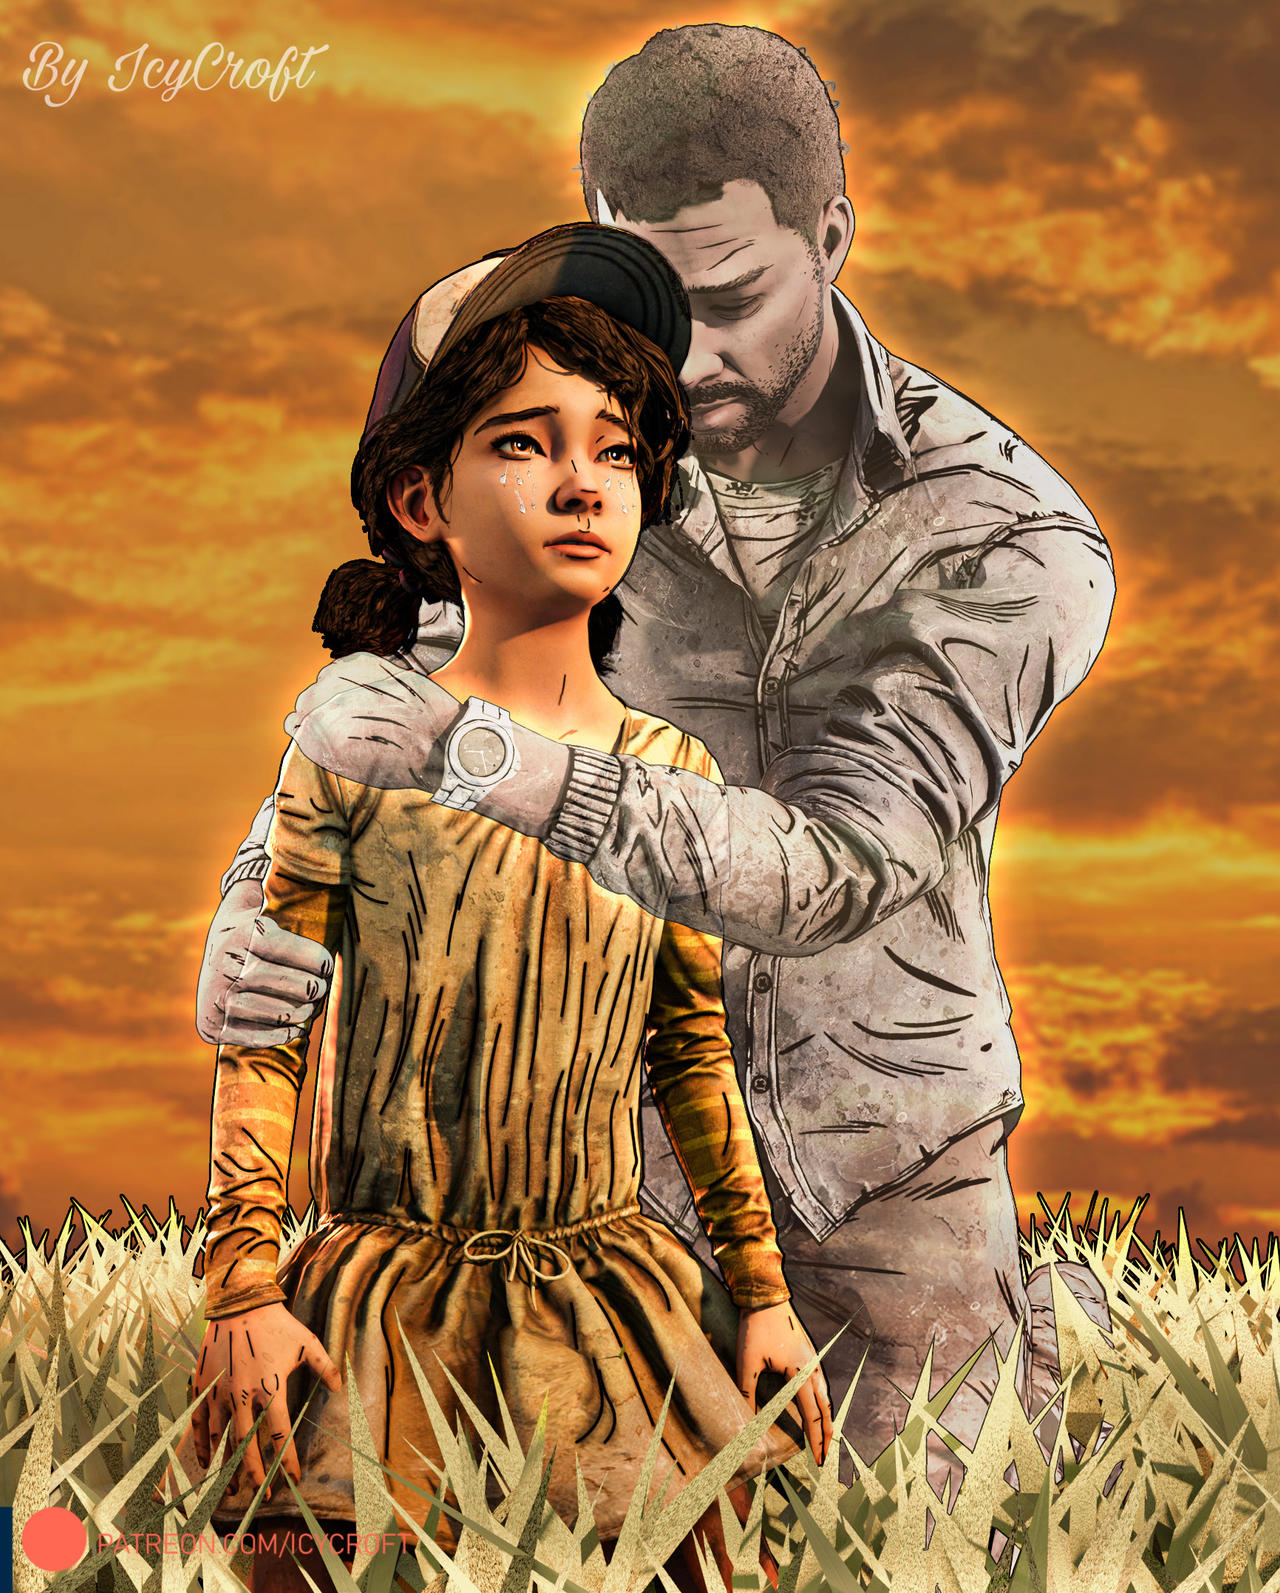 The Walking Dead Game - Lee and Clementine by ICYCROFT on DeviantArt